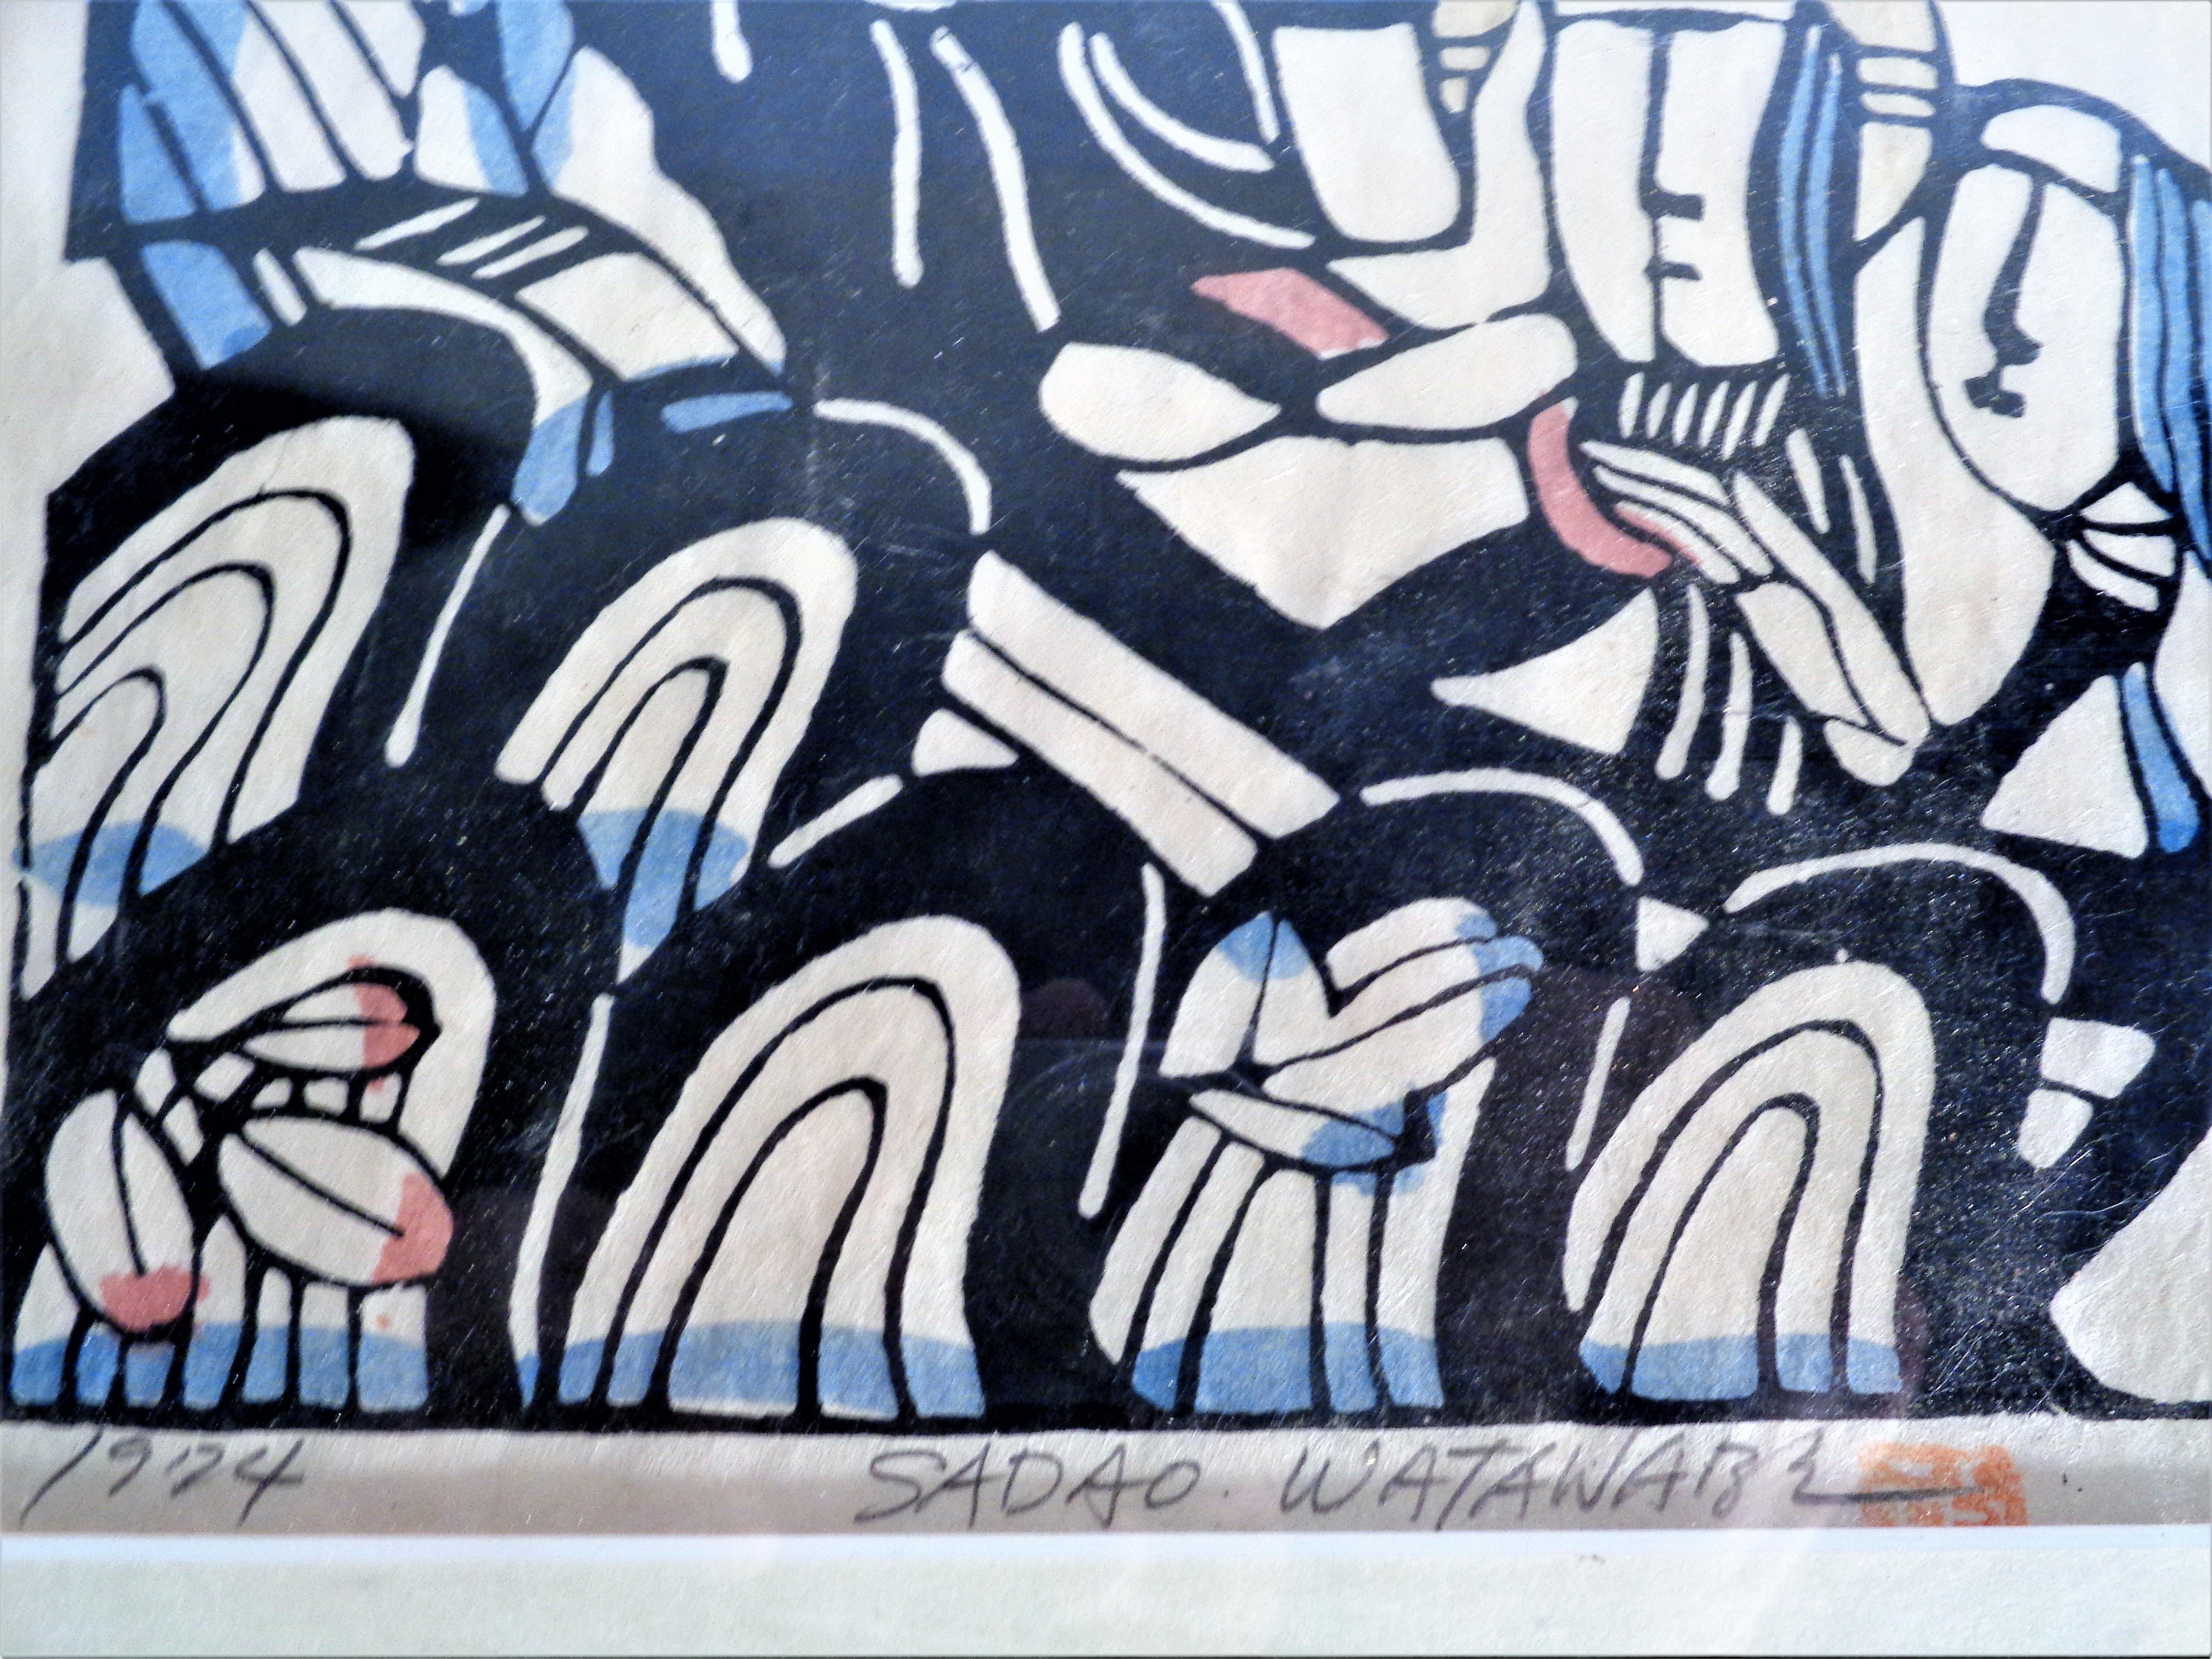 Woodblock print by Sadao Watanabe with artist seal, pencil signed and pencil dated 1974. Set in original gold metal frame. Gallery label and pencil writing on wood back - Art Gallery Kaigado, Hotel Okura Arcade, Imperial Hotel Arcade / The Modern